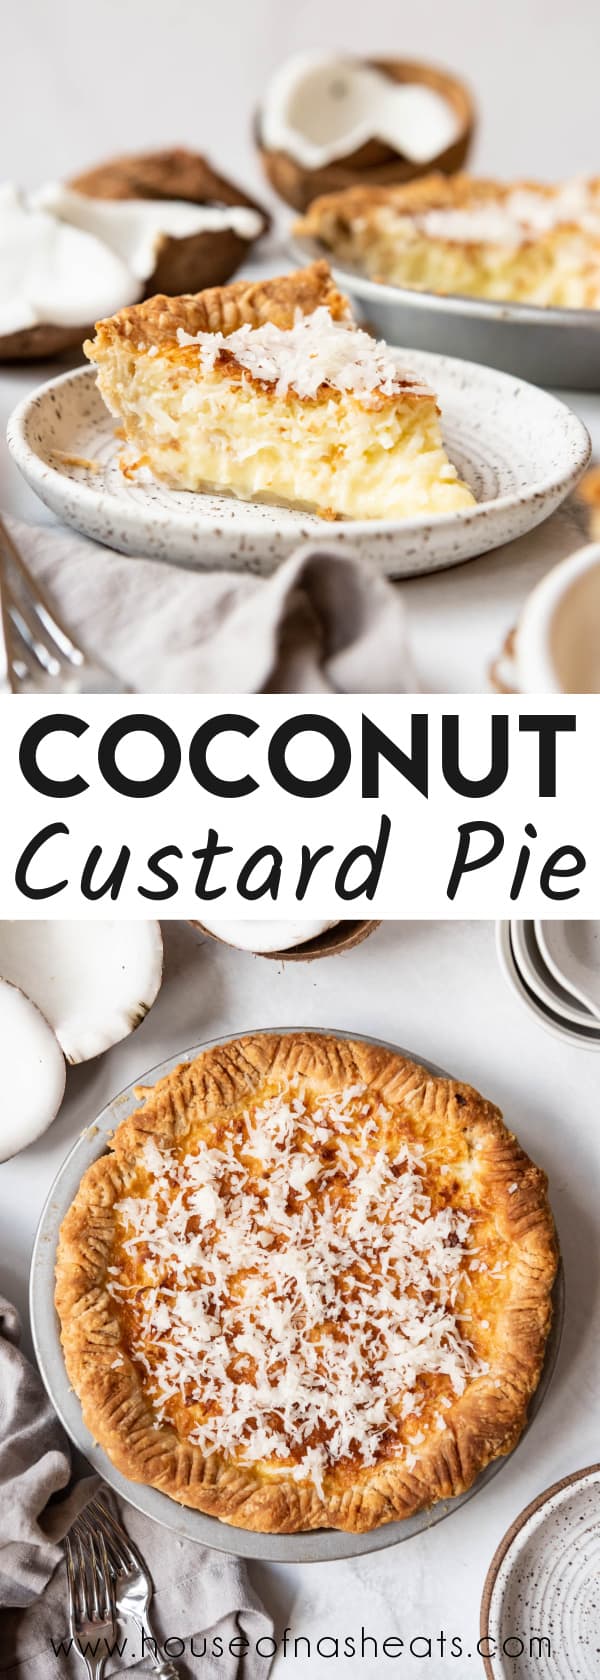 A collage of images of coconut custard pie with text overlay.